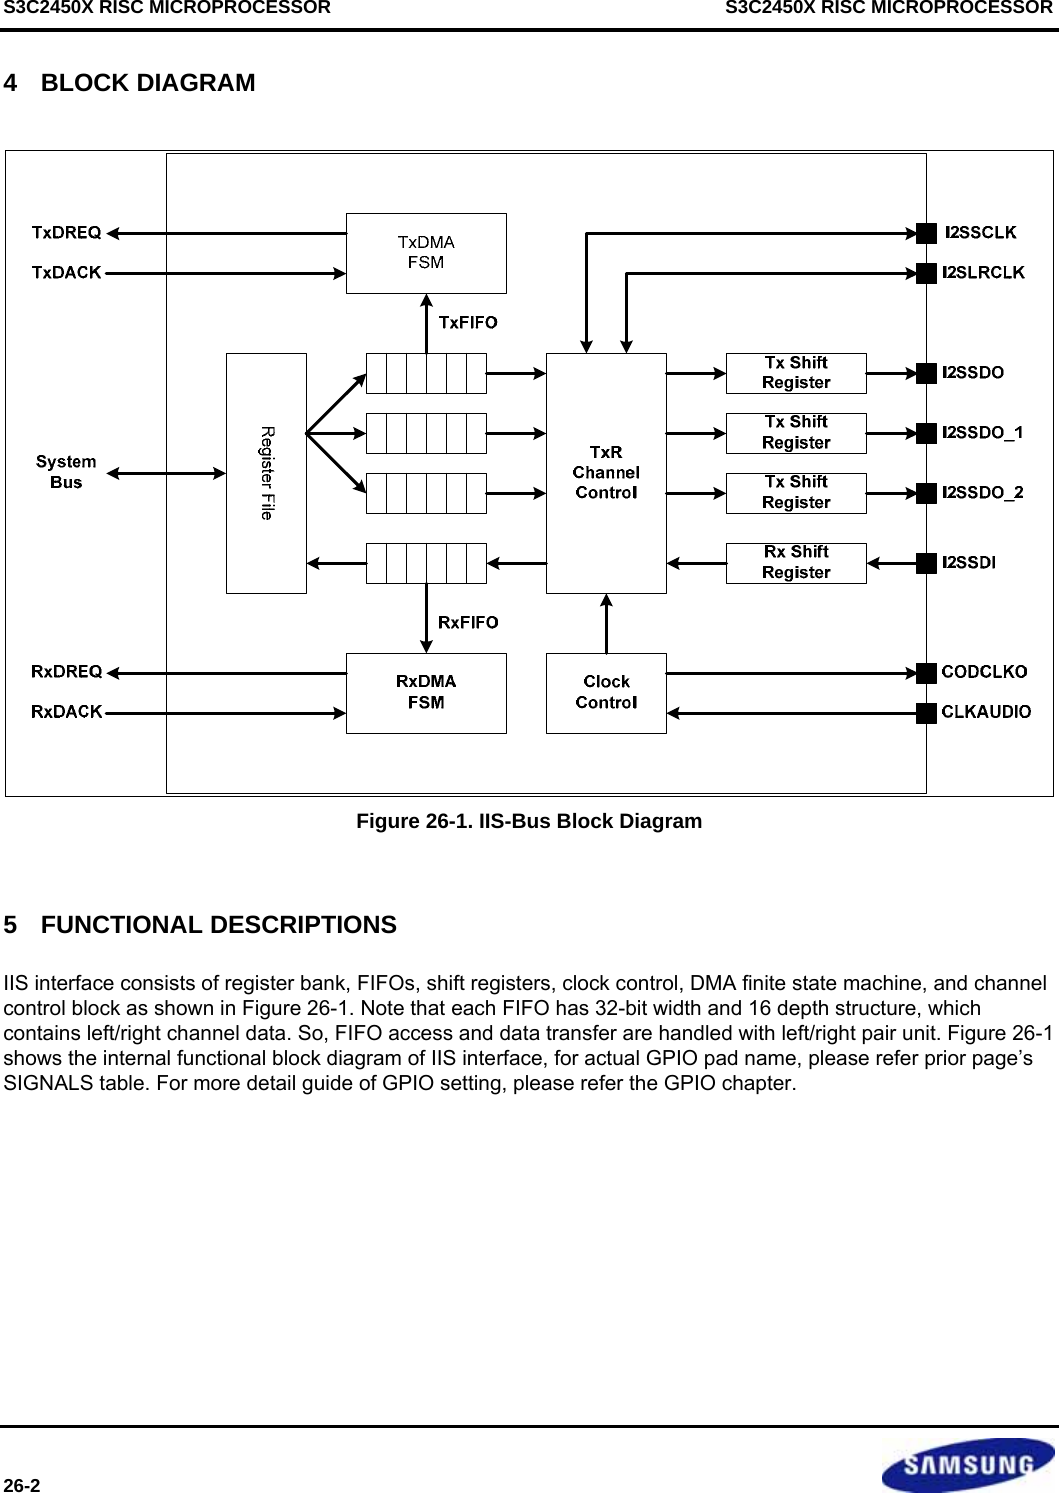 S3C2450X RISC MICROPROCESSOR    S3C2450X RISC MICROPROCESSOR 26-2   4  BLOCK DIAGRAM  Figure 26-1. IIS-Bus Block Diagram  5  FUNCTIONAL DESCRIPTIONS IIS interface consists of register bank, FIFOs, shift registers, clock control, DMA finite state machine, and channel control block as shown in Figure 26-1. Note that each FIFO has 32-bit width and 16 depth structure, which contains left/right channel data. So, FIFO access and data transfer are handled with left/right pair unit. Figure 26-1 shows the internal functional block diagram of IIS interface, for actual GPIO pad name, please refer prior page’s SIGNALS table. For more detail guide of GPIO setting, please refer the GPIO chapter. 